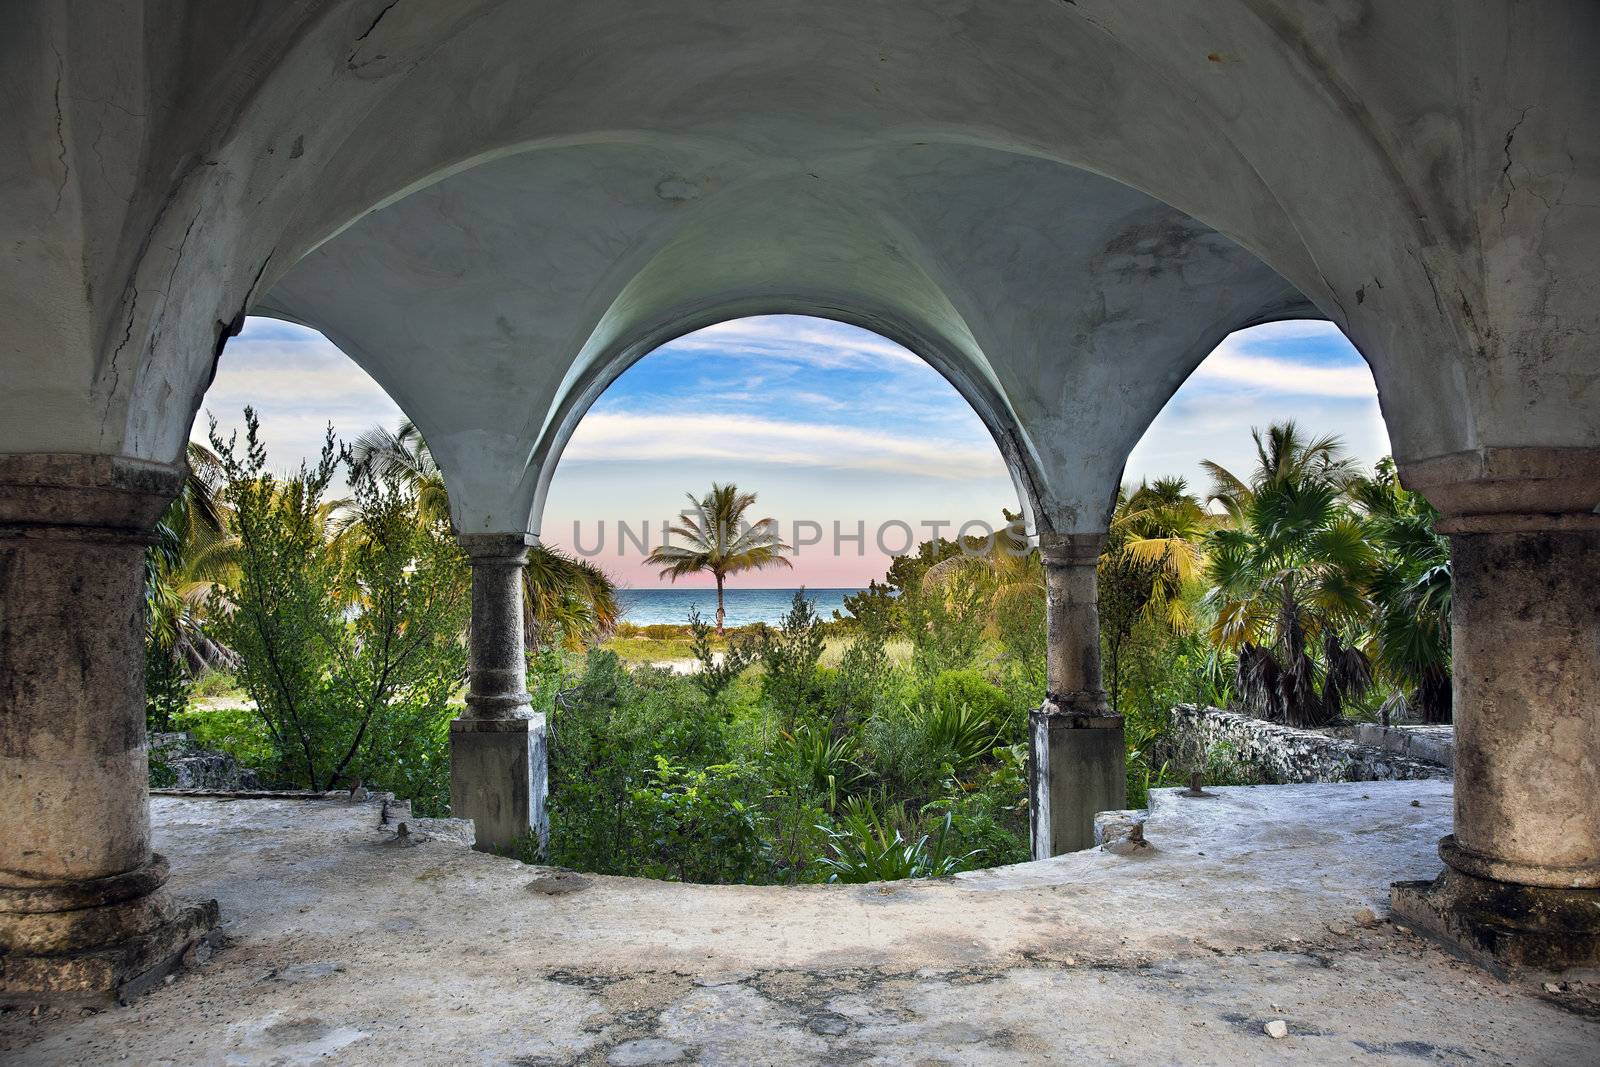 A beautiful view of the ocean from inside an old abandoned mansion.